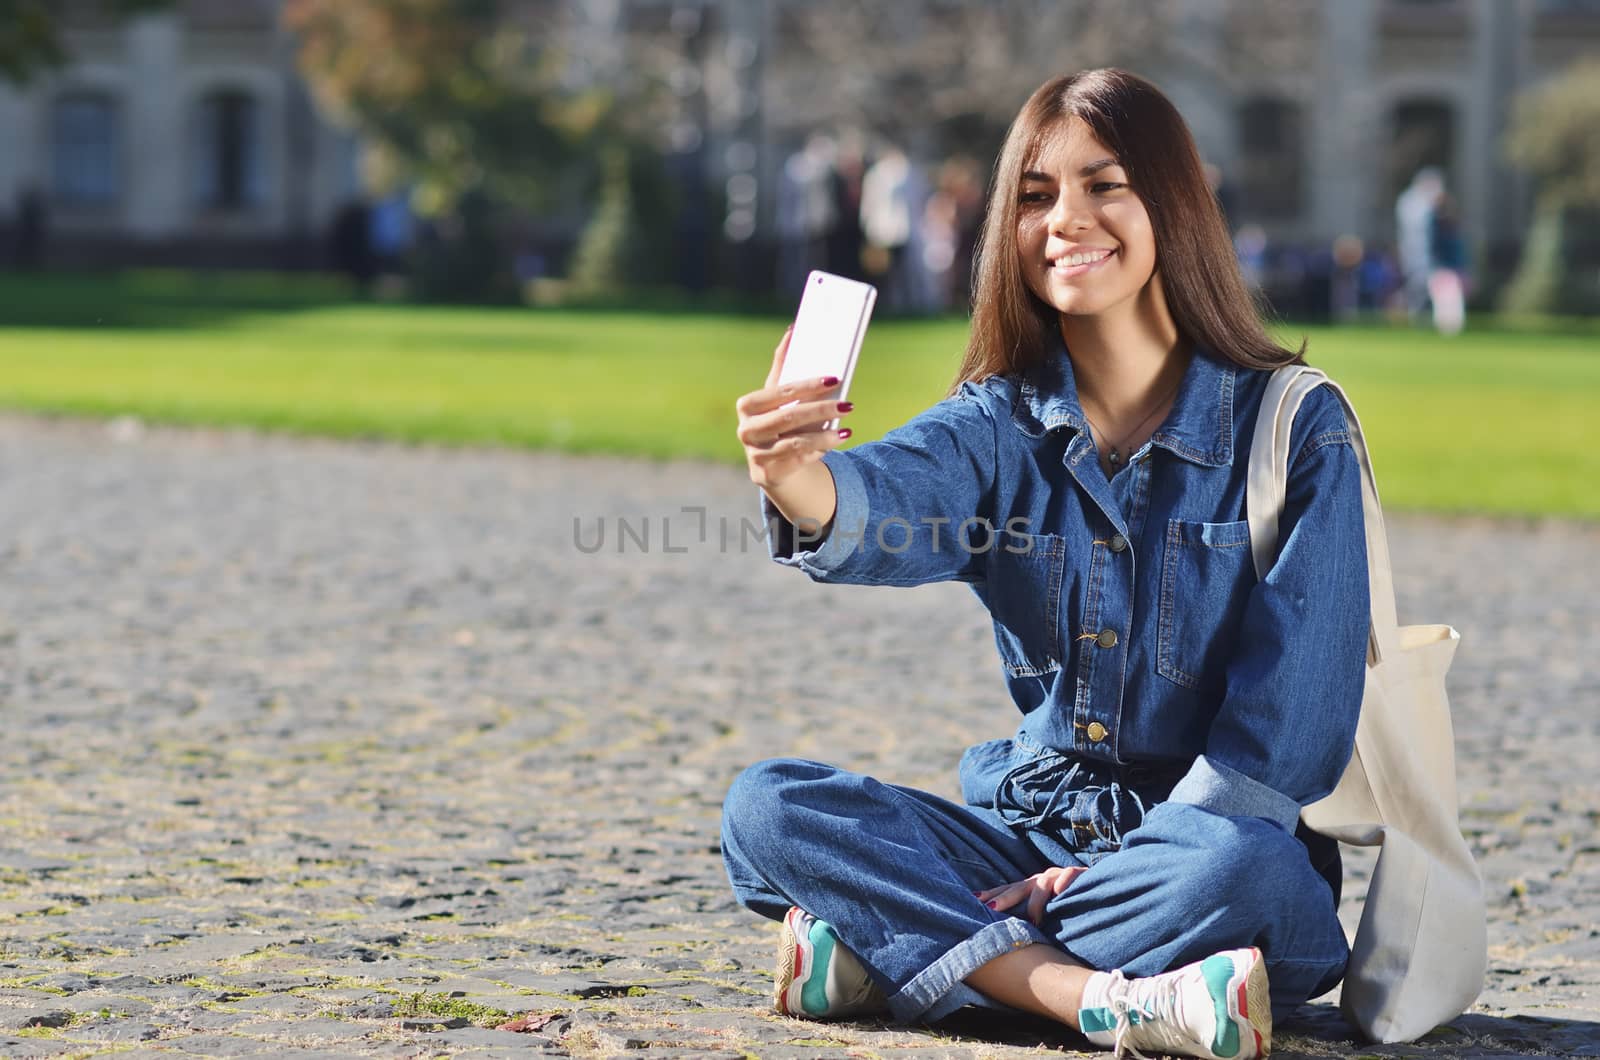 Cheerful young woman is sitting in the campus and taking a selfie, dressed in a denim jacket and sneakers